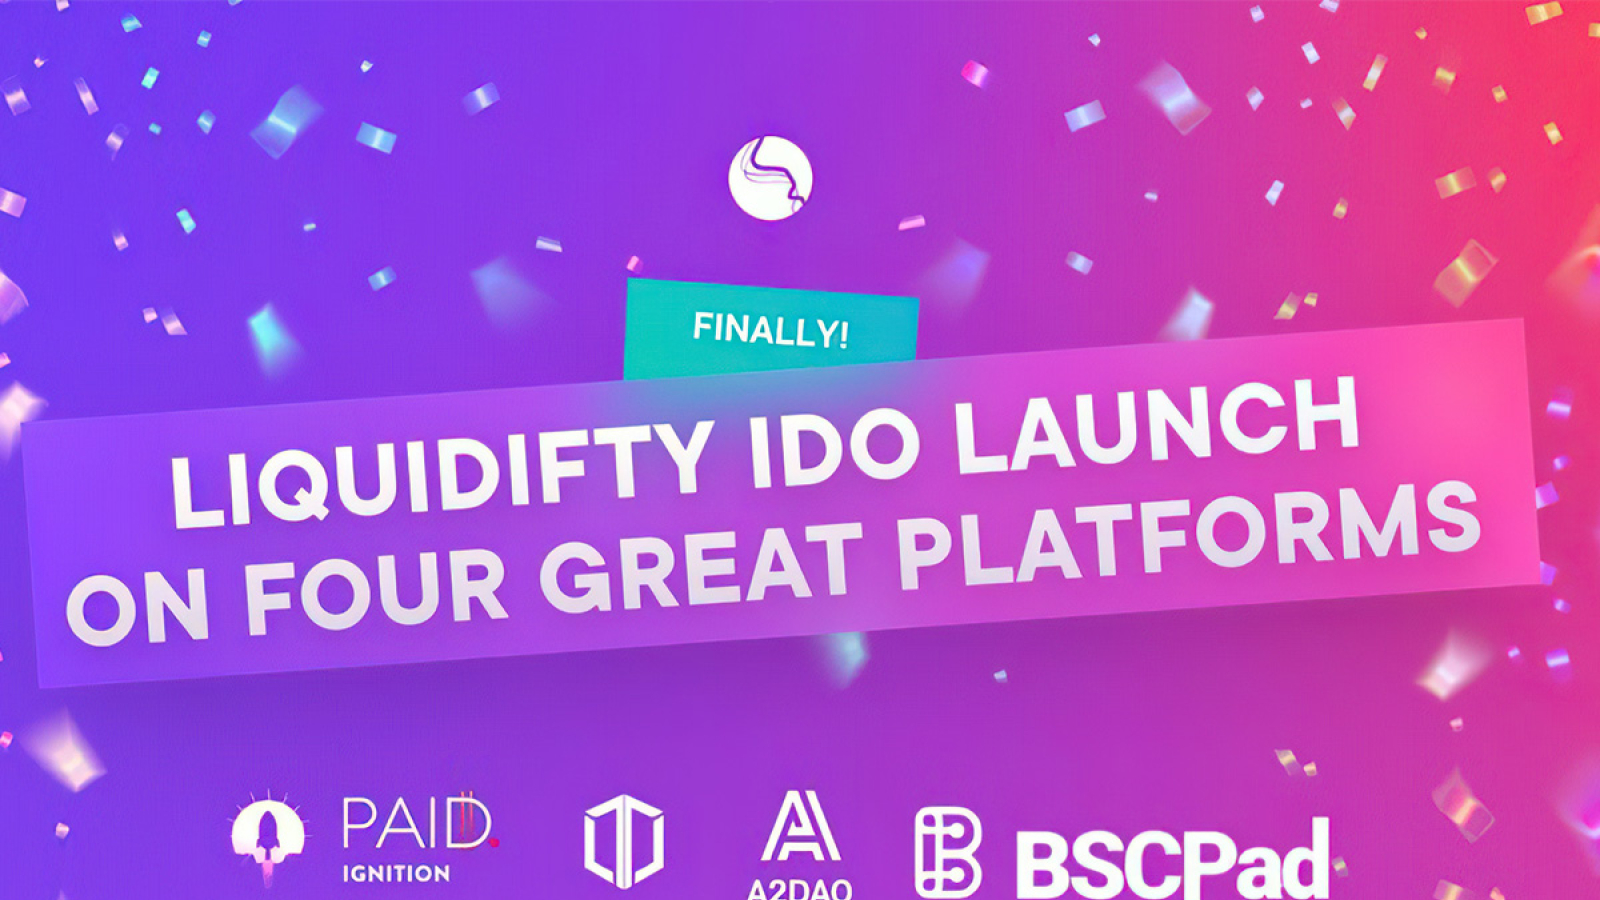 Liquidifty IDO Launch On Four Famous Platforms